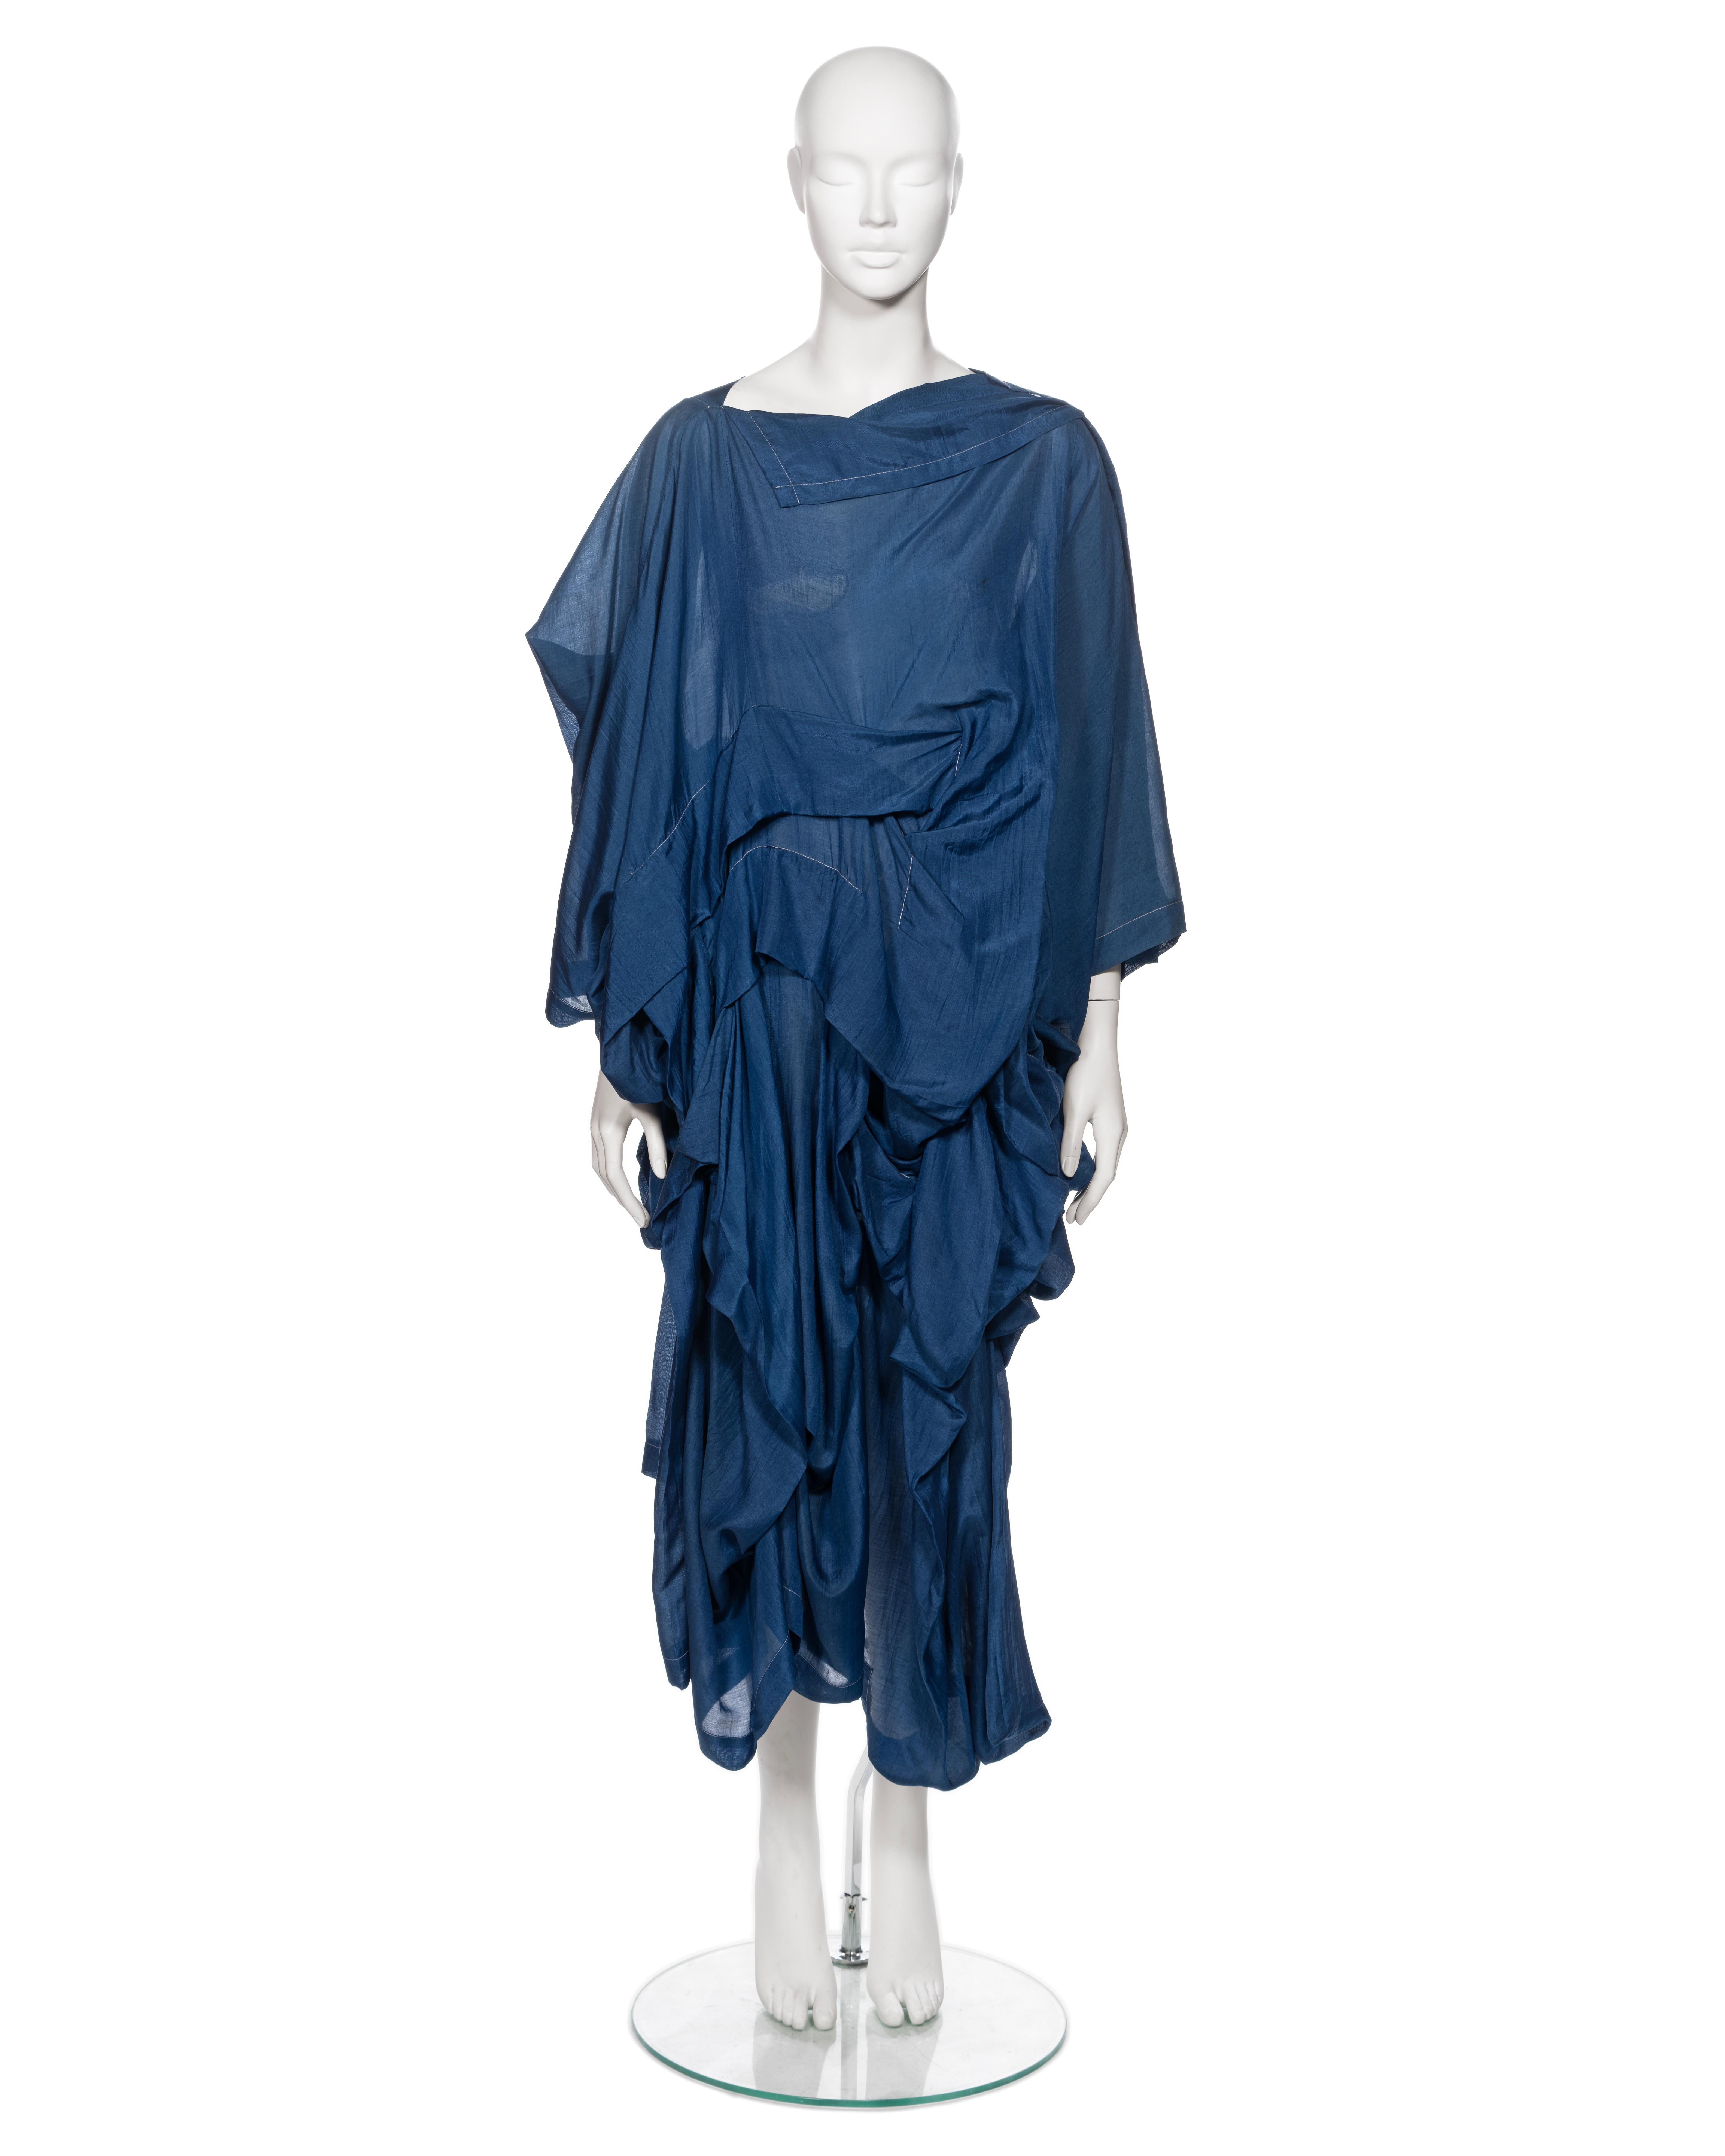 ▪ Brand: Comme Des Garçons 
▪ Creative Director: Rei Kawakubo
▪ Collection: Fall-Winter 1984
▪ Sold by: One of a Kind Archive
▪ Fabric: 65% Rayon, 35% Silk
▪ Details: Large asymmetric drapes and tucks sewn with a white contrast top stitch 
▪ Notes: